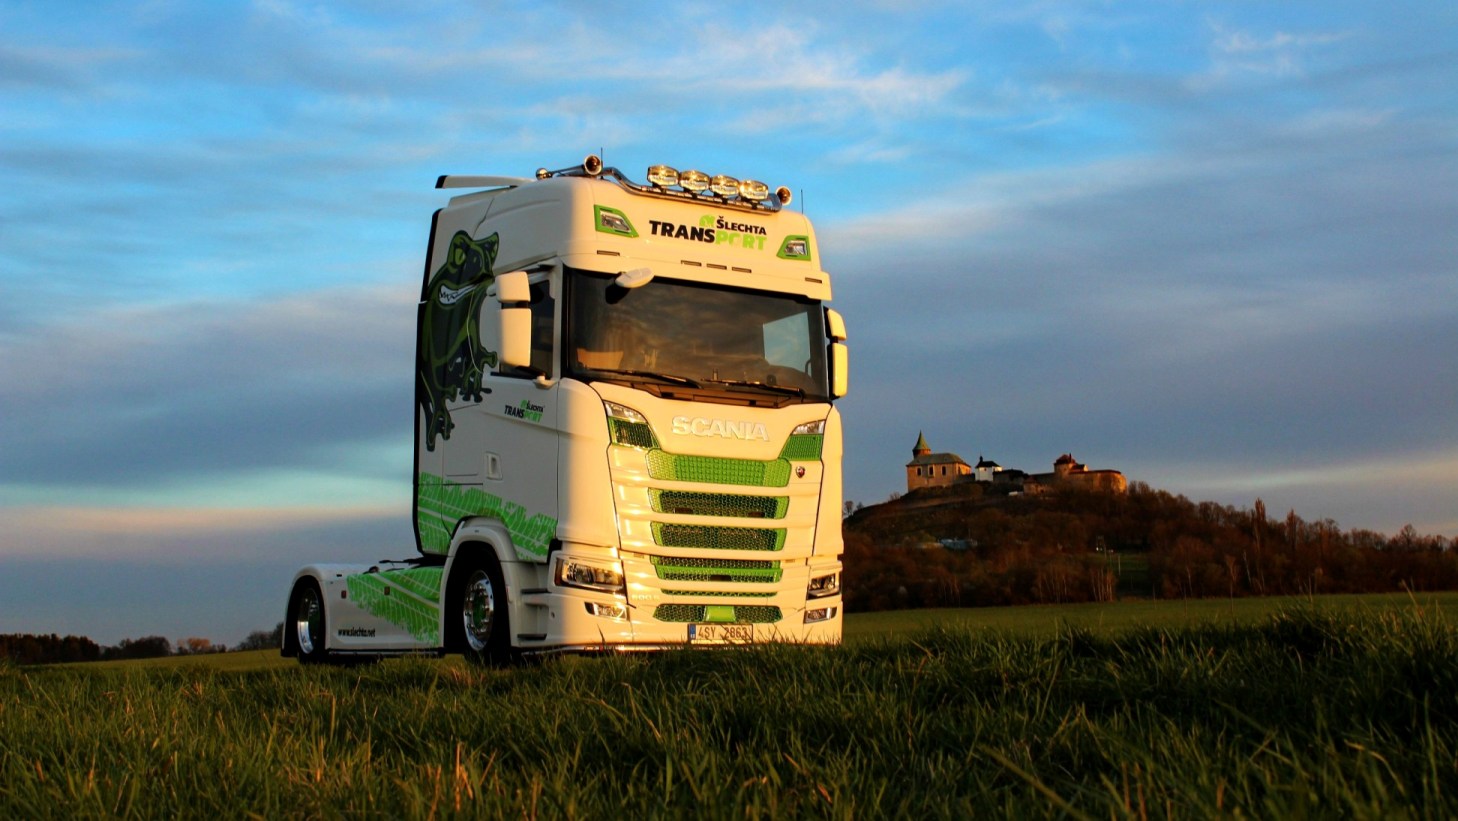 The new Scania S500 has arrived!